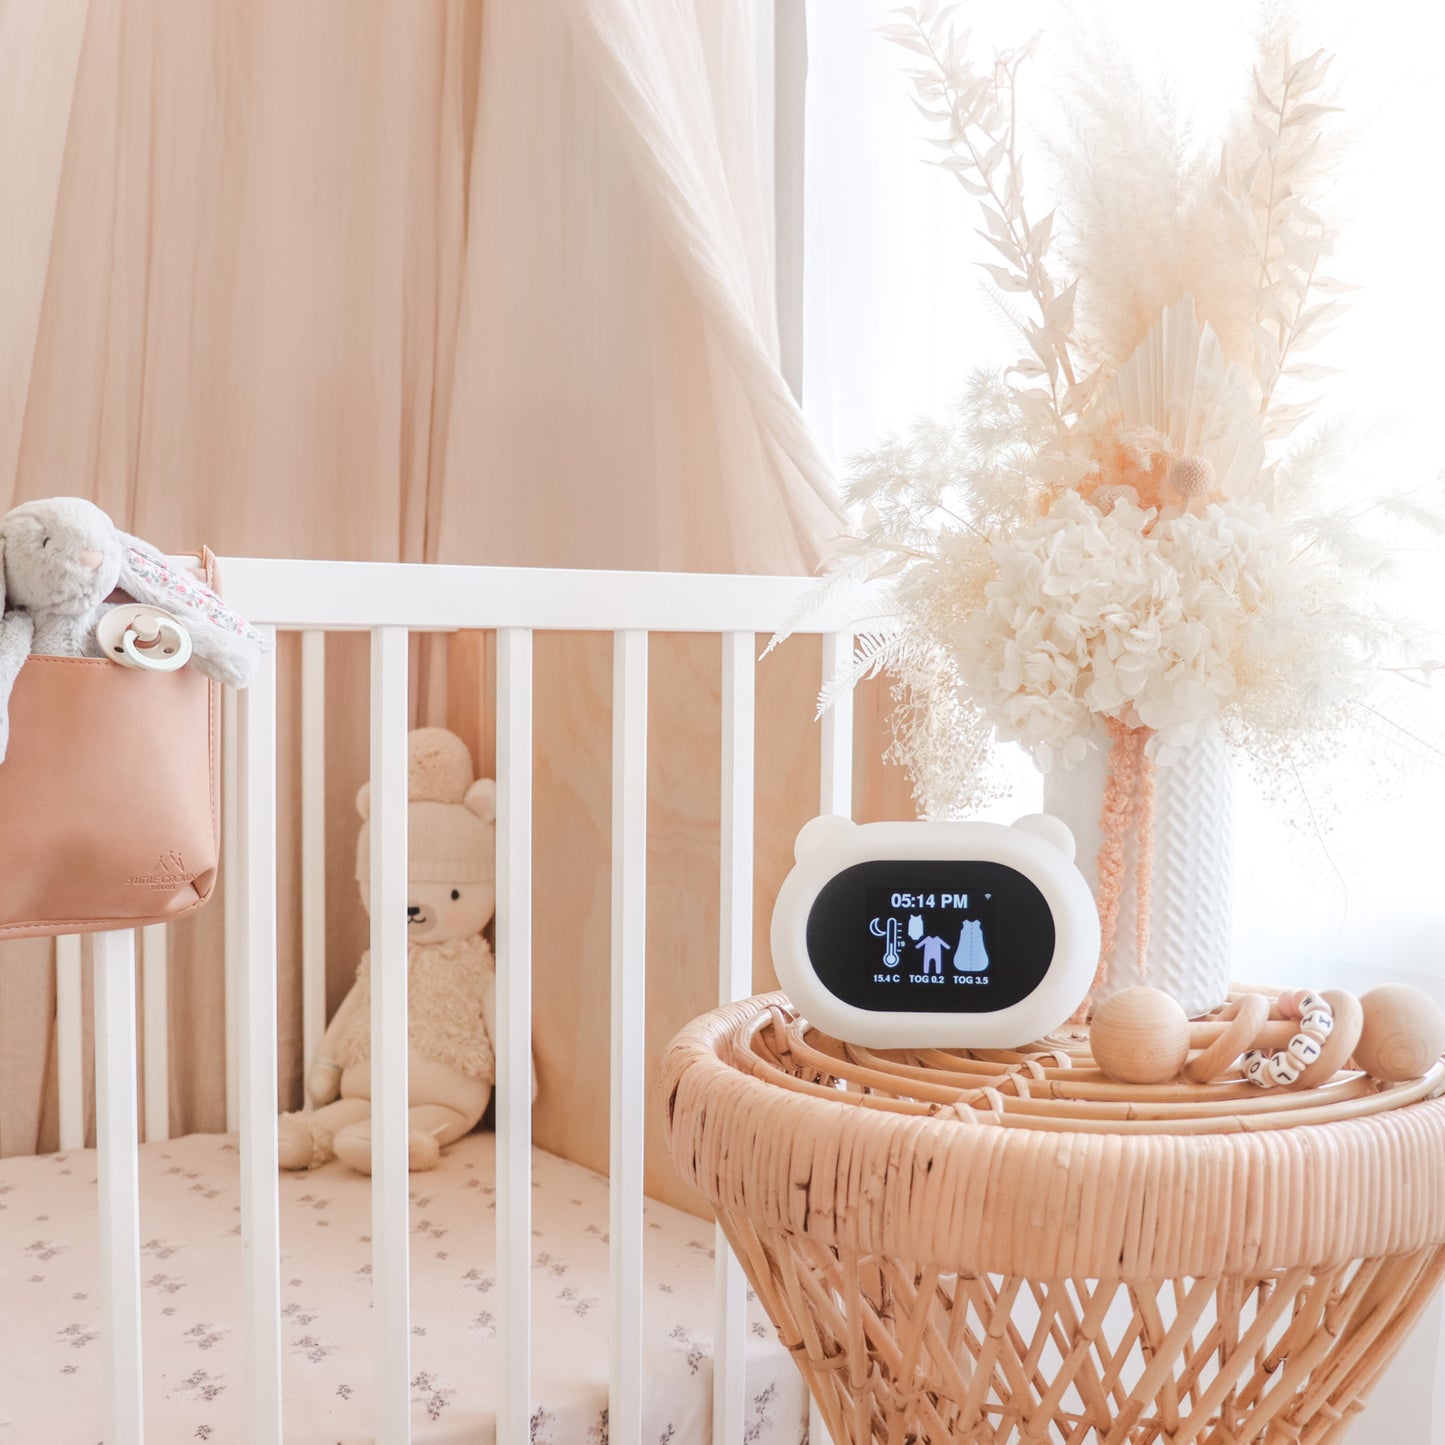 Baby Sleepwear Guide, Night Light and Thermometer